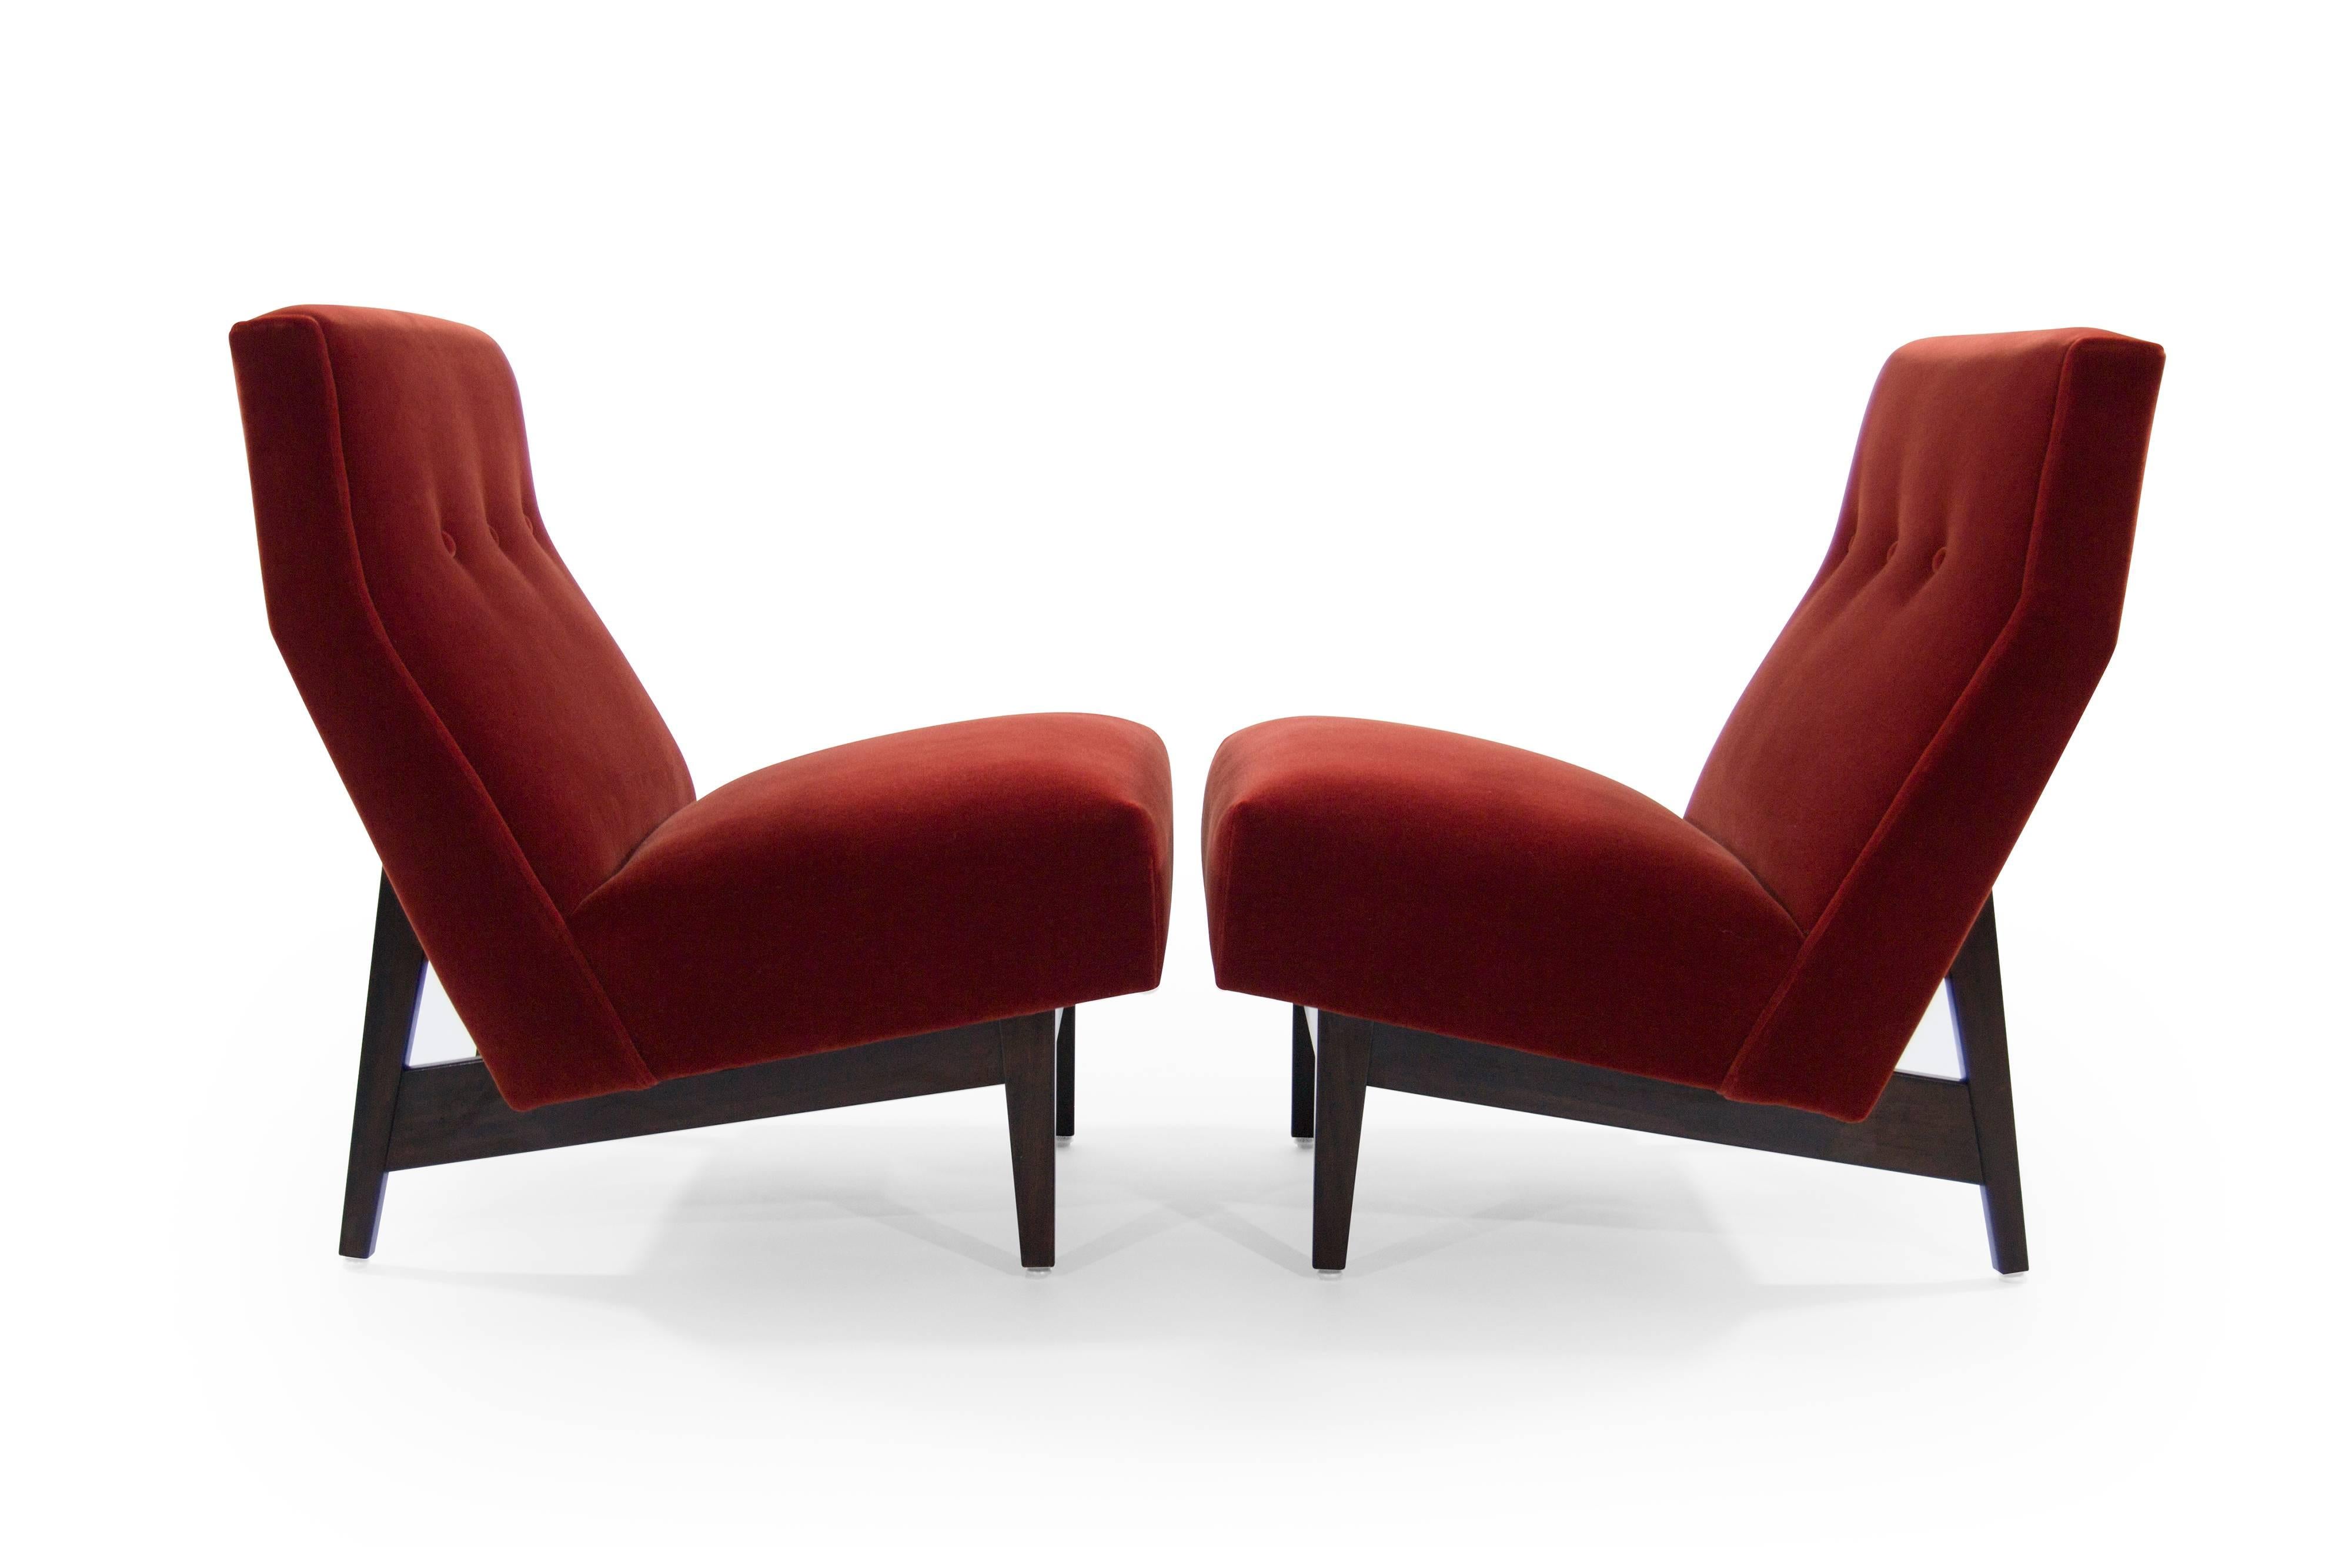 Mid-Century Modern Jens Risom Slipper Chairs in Rust Red Mohair